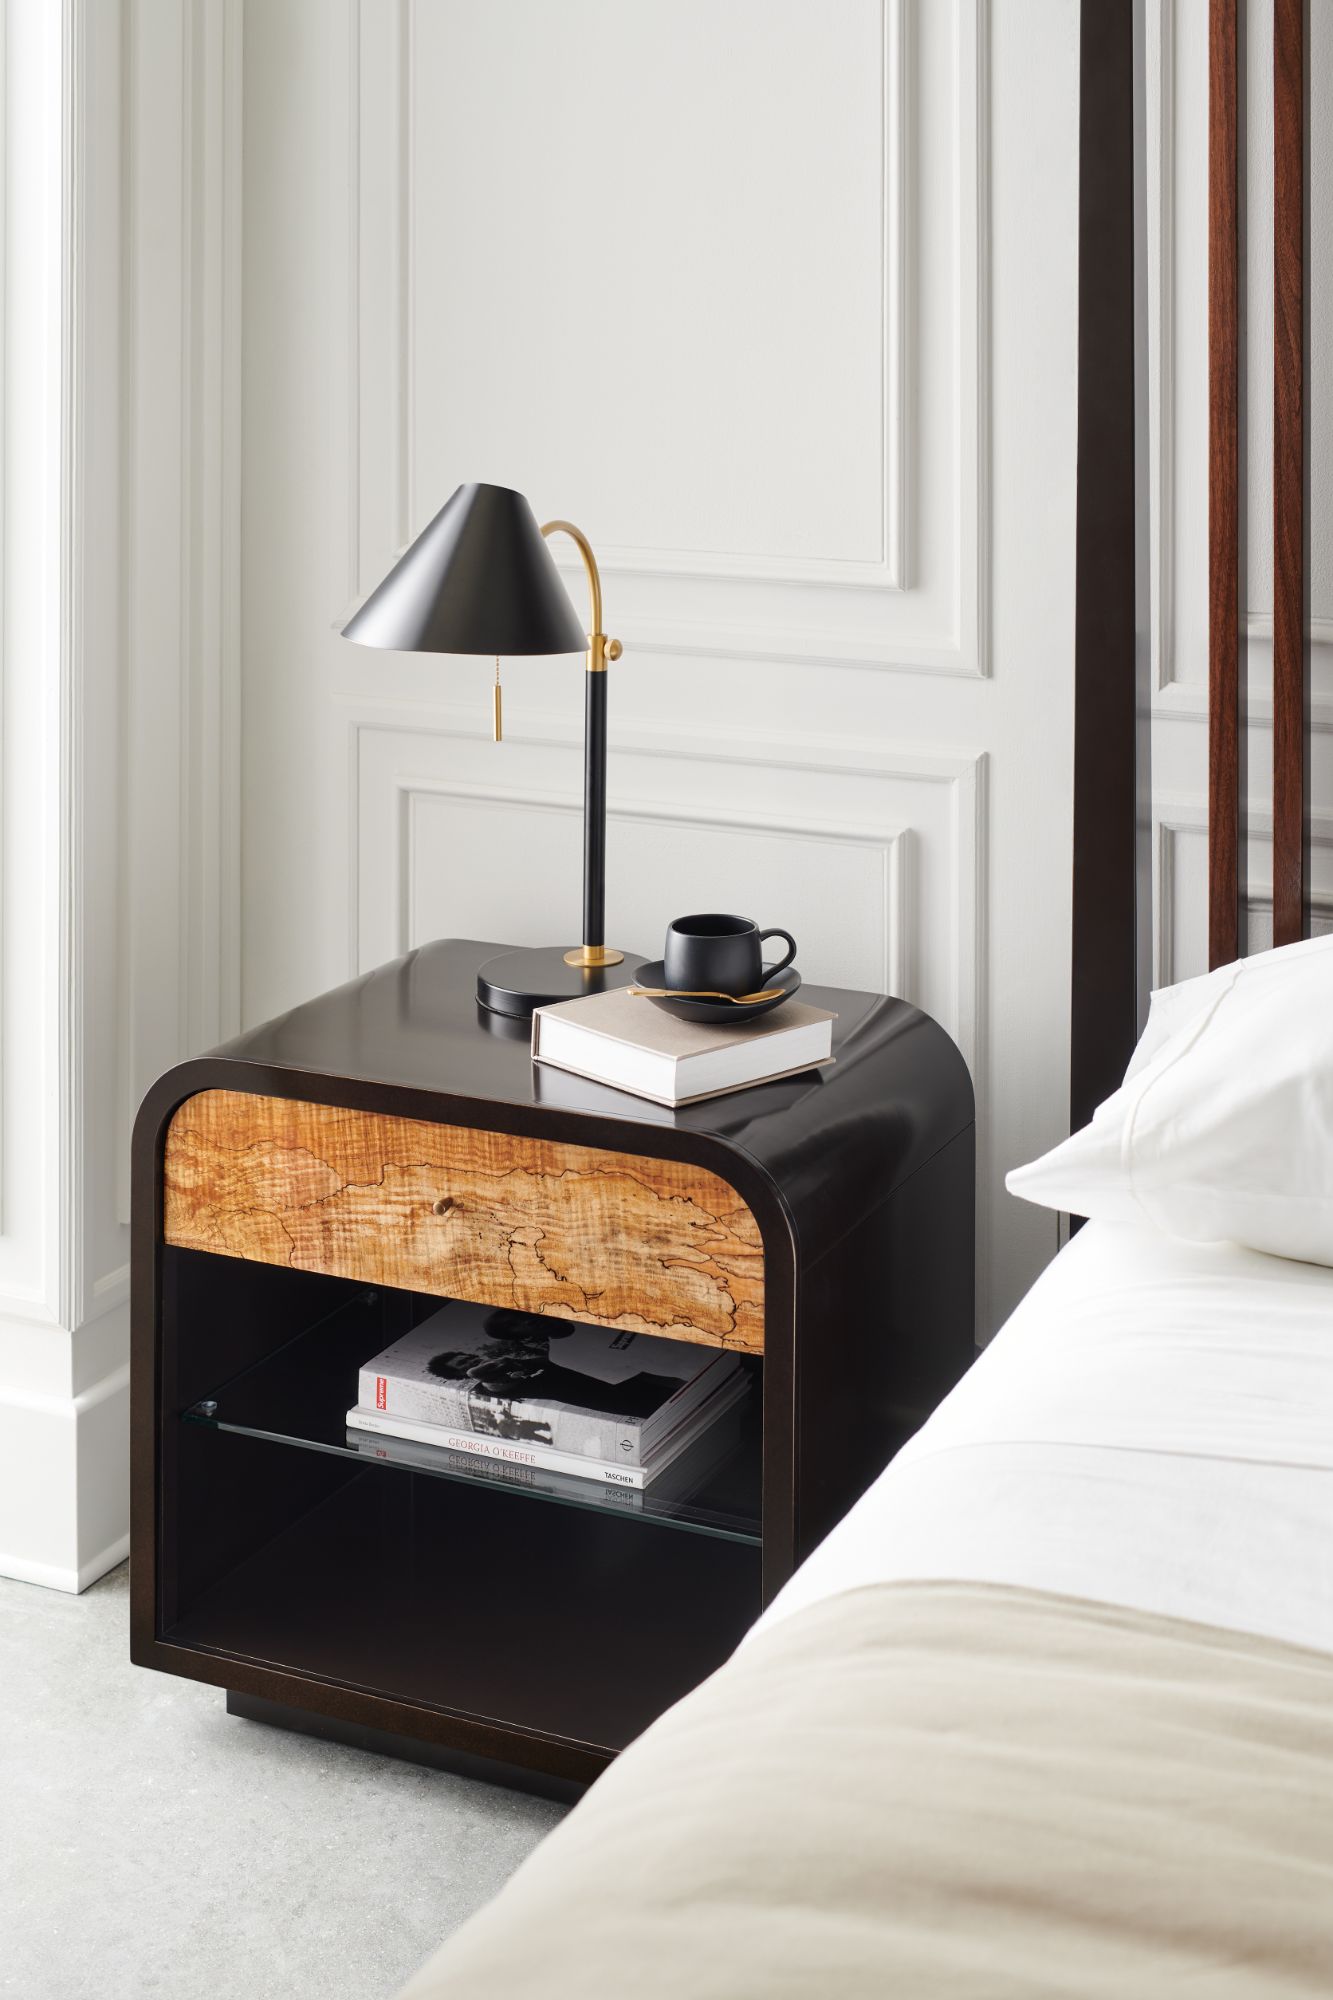  Caracole-Caracole Classic Excess Knot Bedside Table-Brown 981 